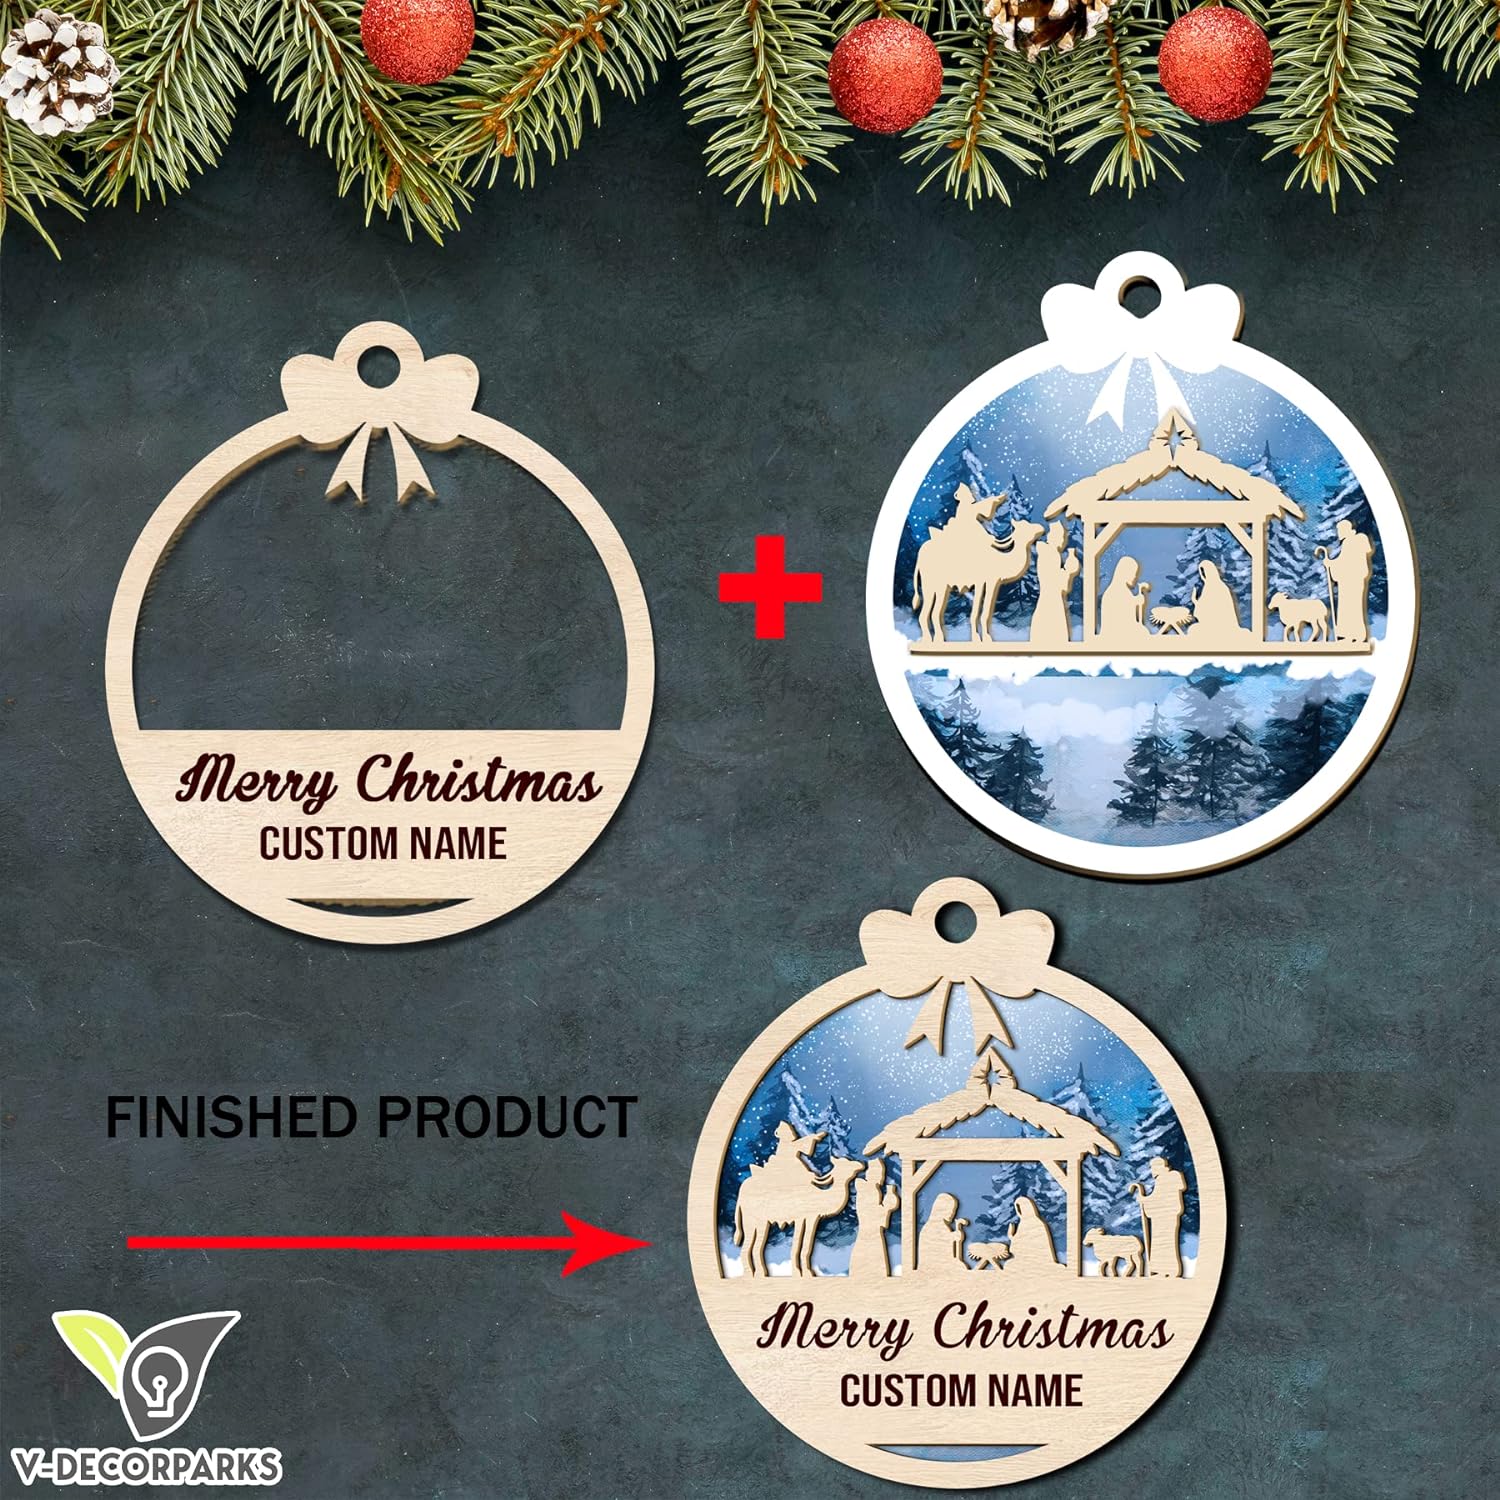 Custom Family Christmas Nativity of Jesus Wood Layered Ornaments - Personalized Ornaments for Christmas Tree Decorations